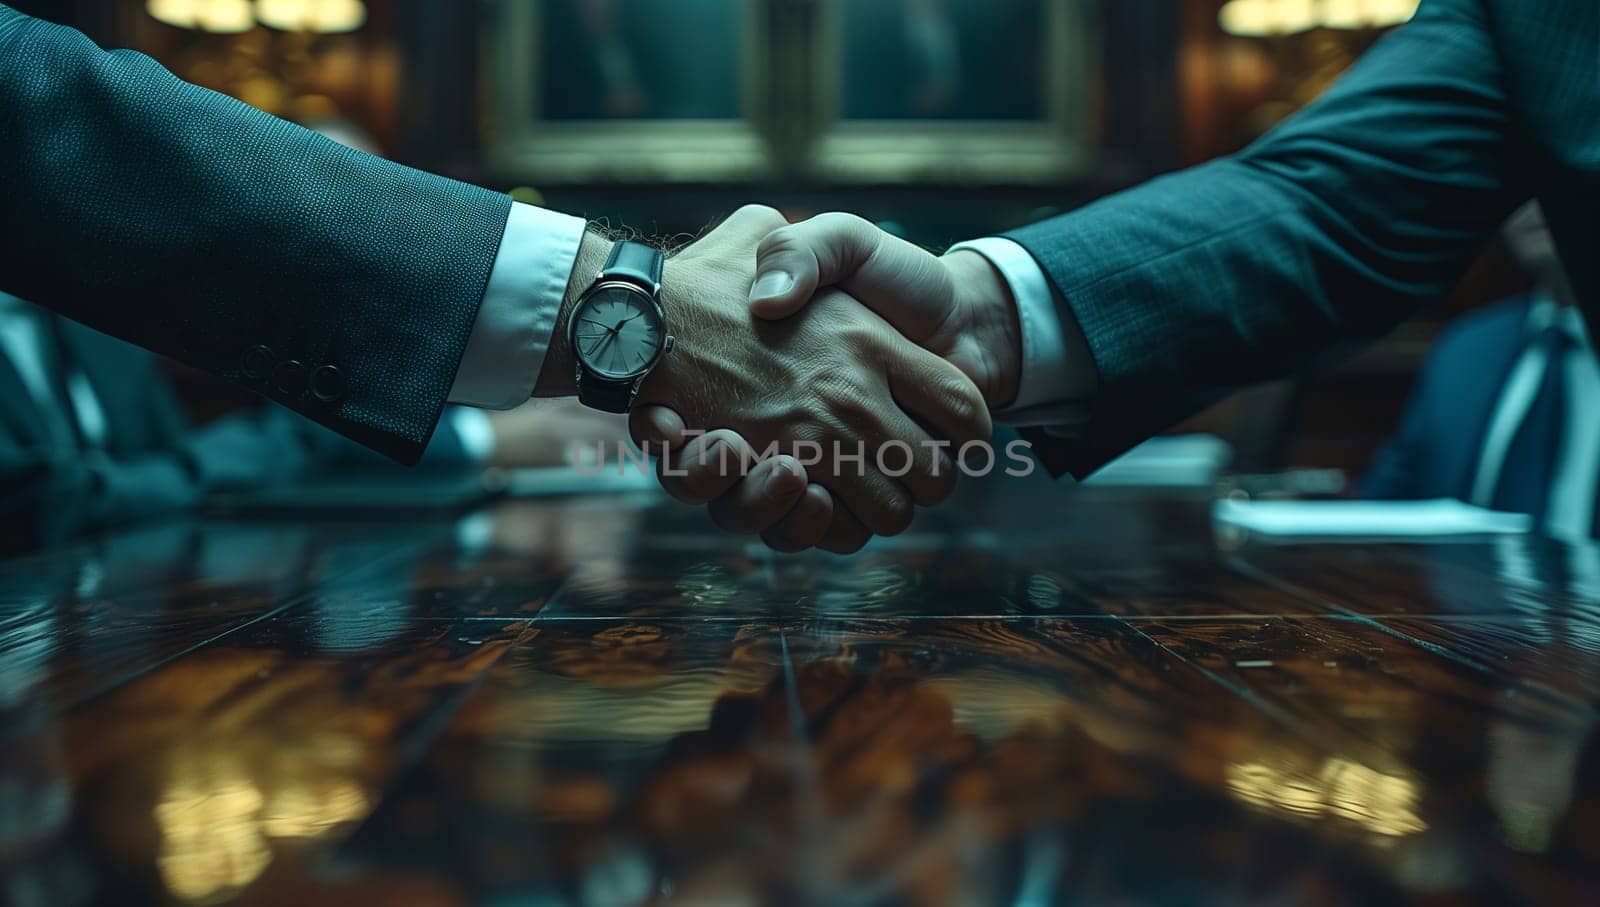 Two men in electric blue watch as they shake hands over a table by richwolf